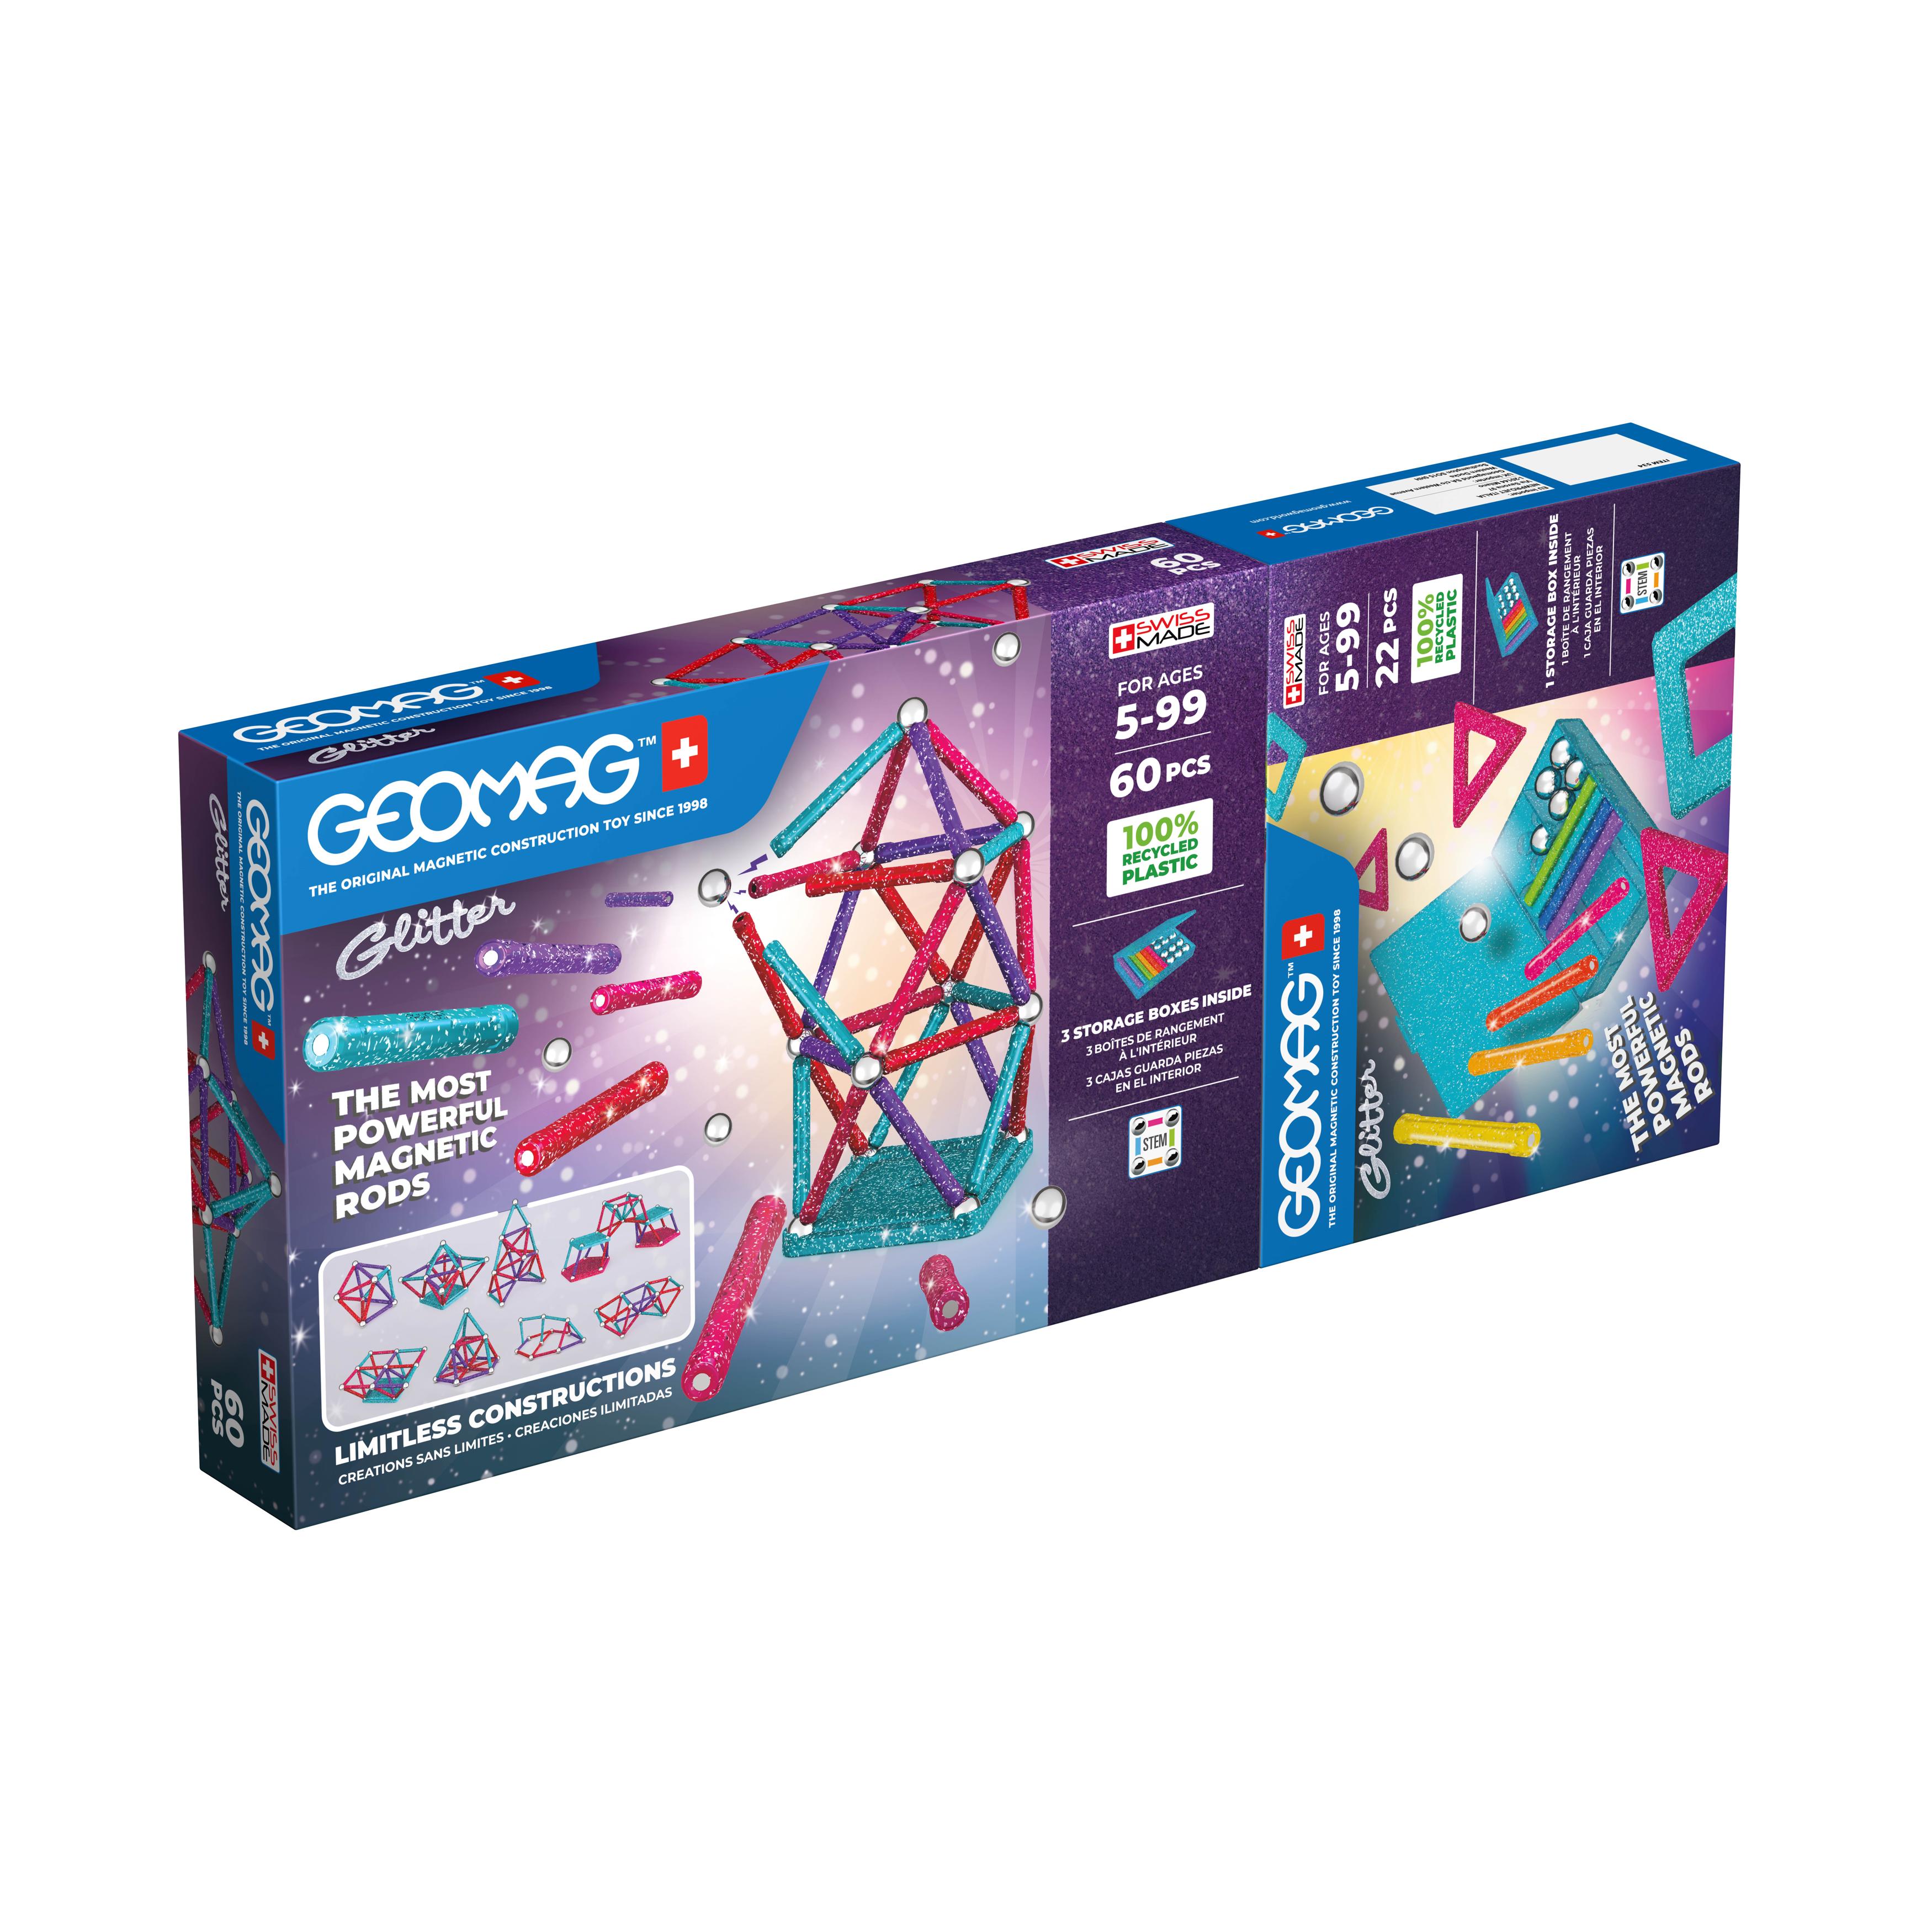 Geomag - Glitter Double pack 22 + 60 pcs. (4817)